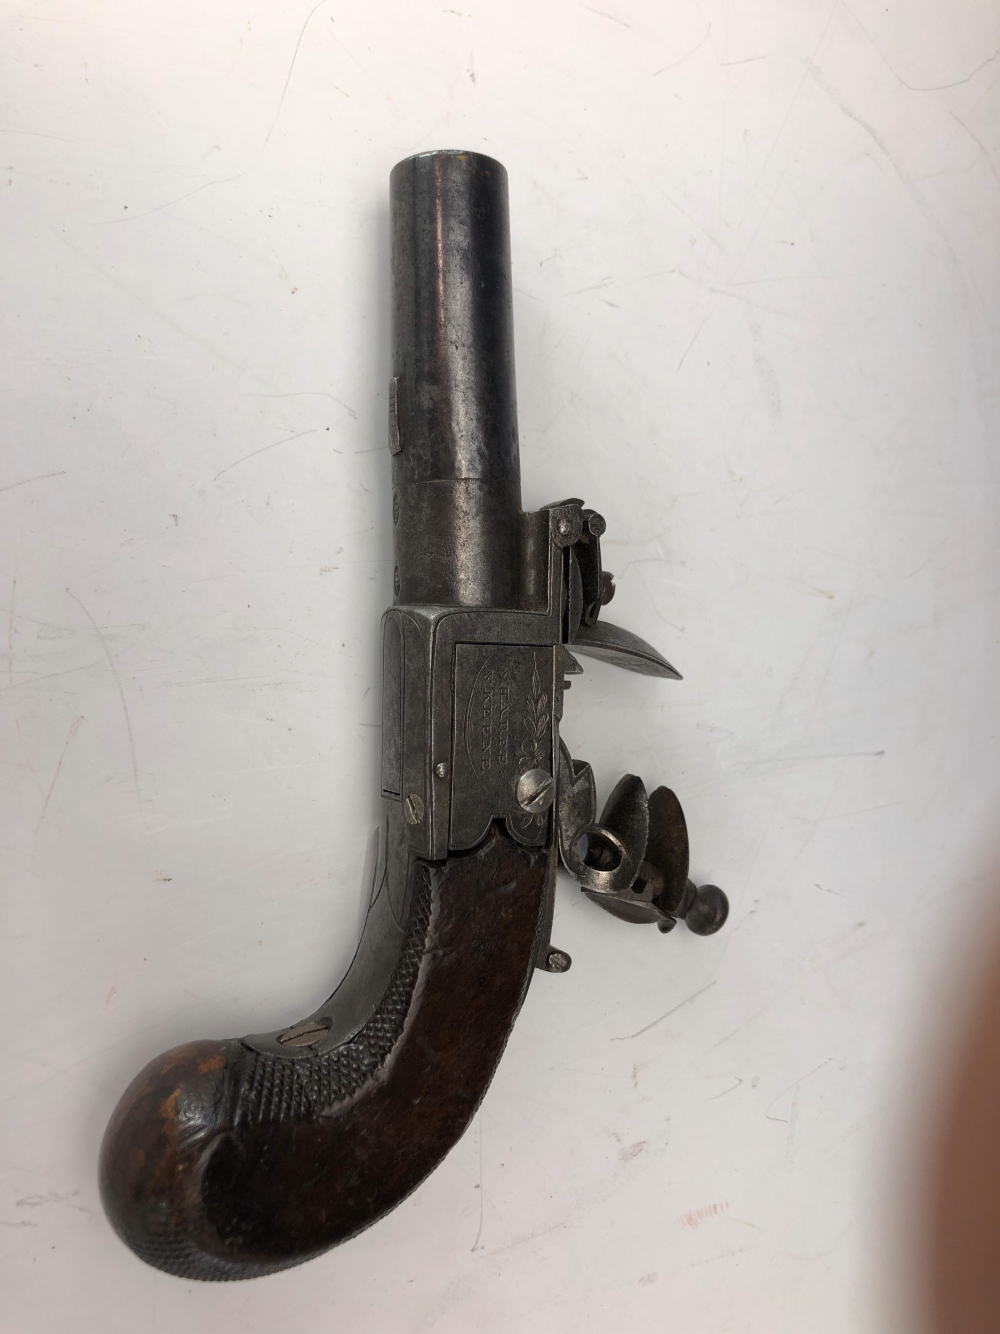 A SHARPE AND SKEENE TURN OFF BARREL FLINTLOCK PISTOL WITH A SAFE LEVER BEHIND THE COCK - Image 2 of 7